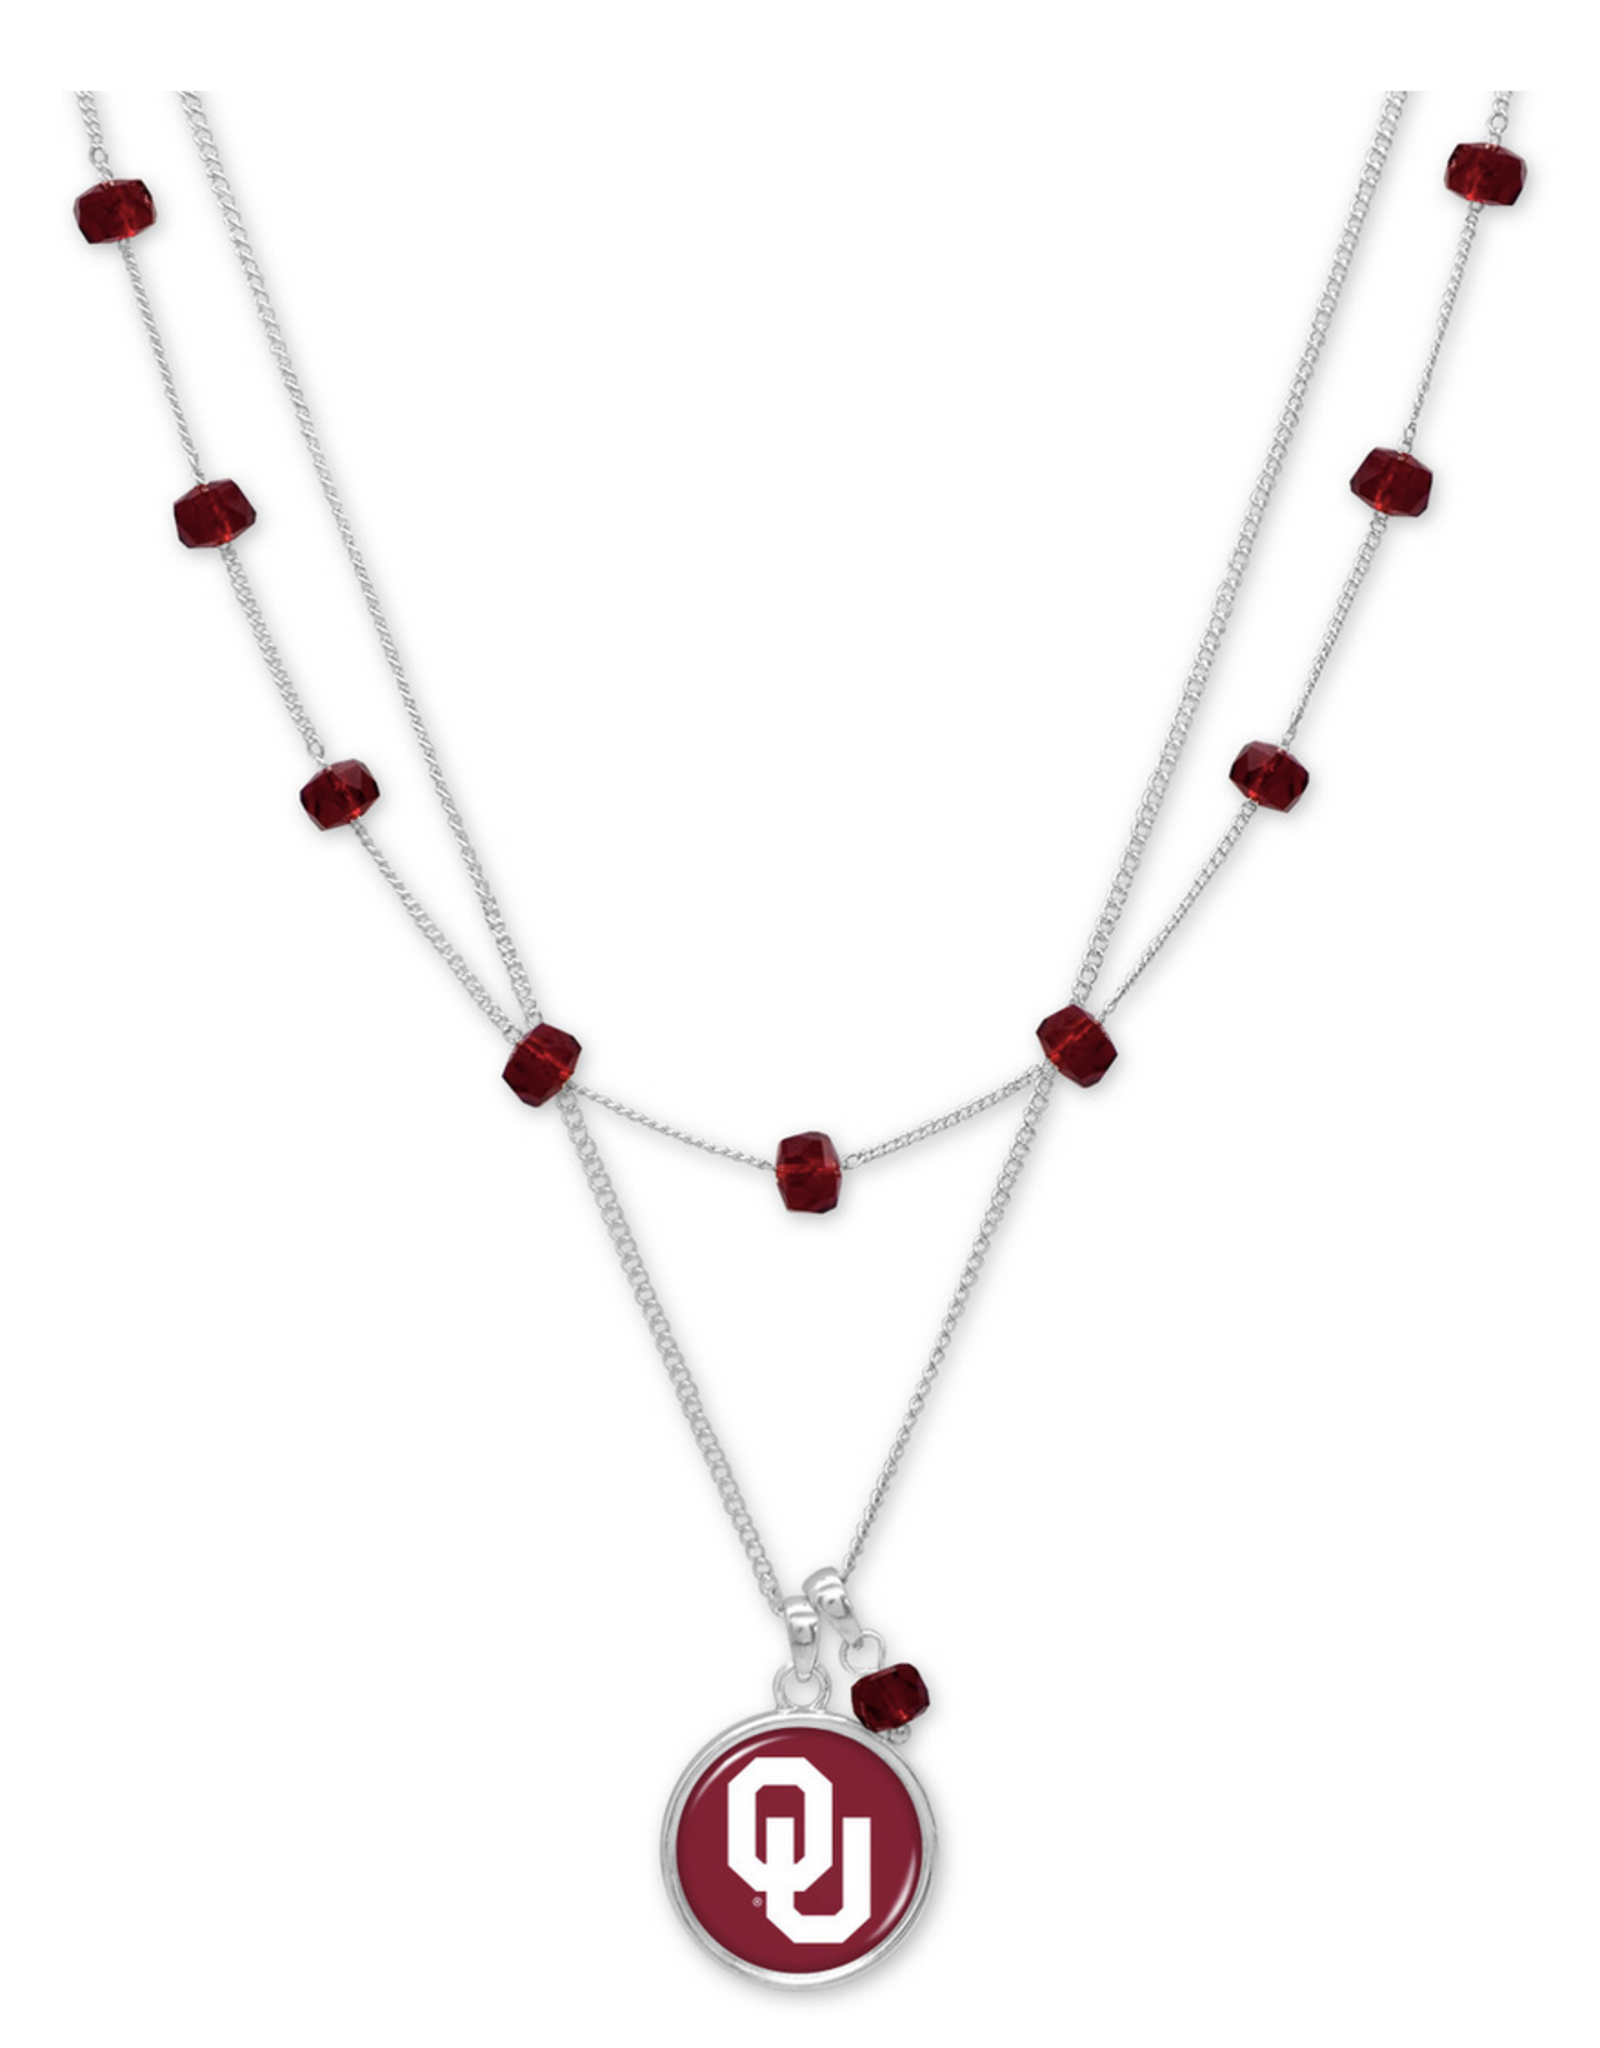 FTH x FTH OU Ivy With Beads Necklace